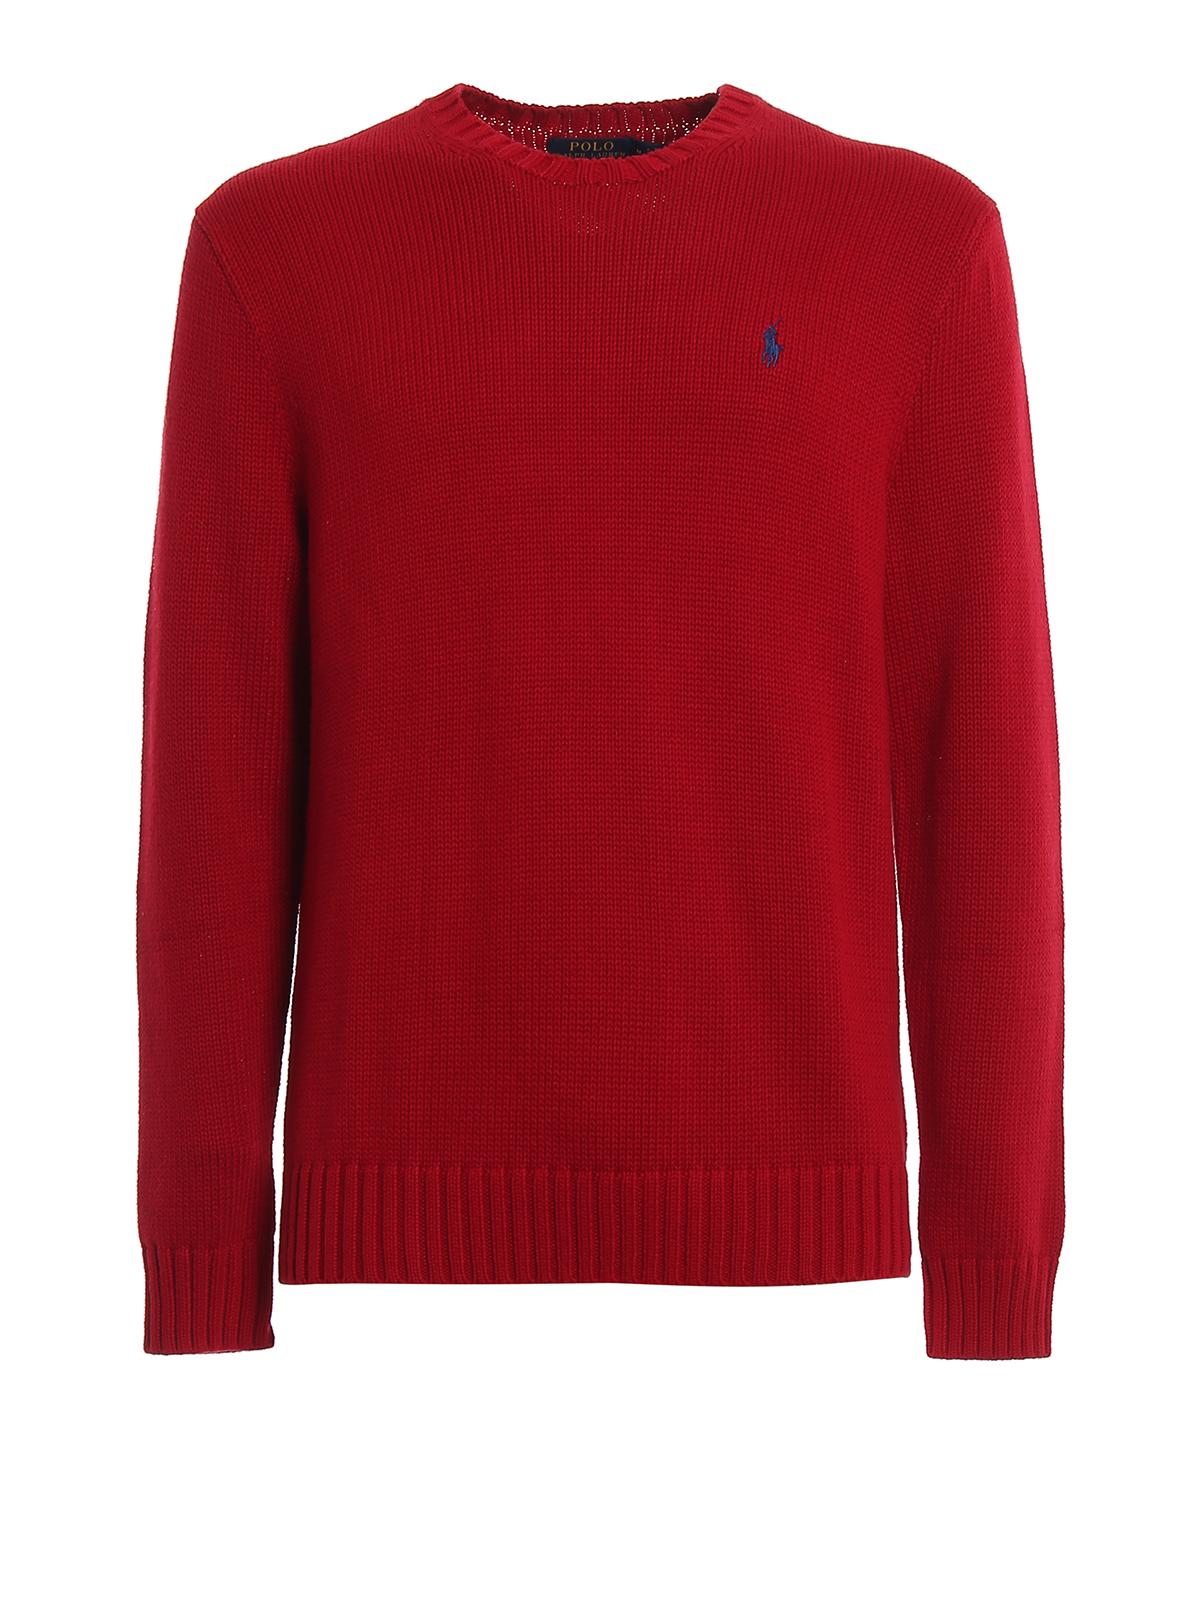 Polo Ralph Lauren Red Cotton Sweater for Men - Lyst